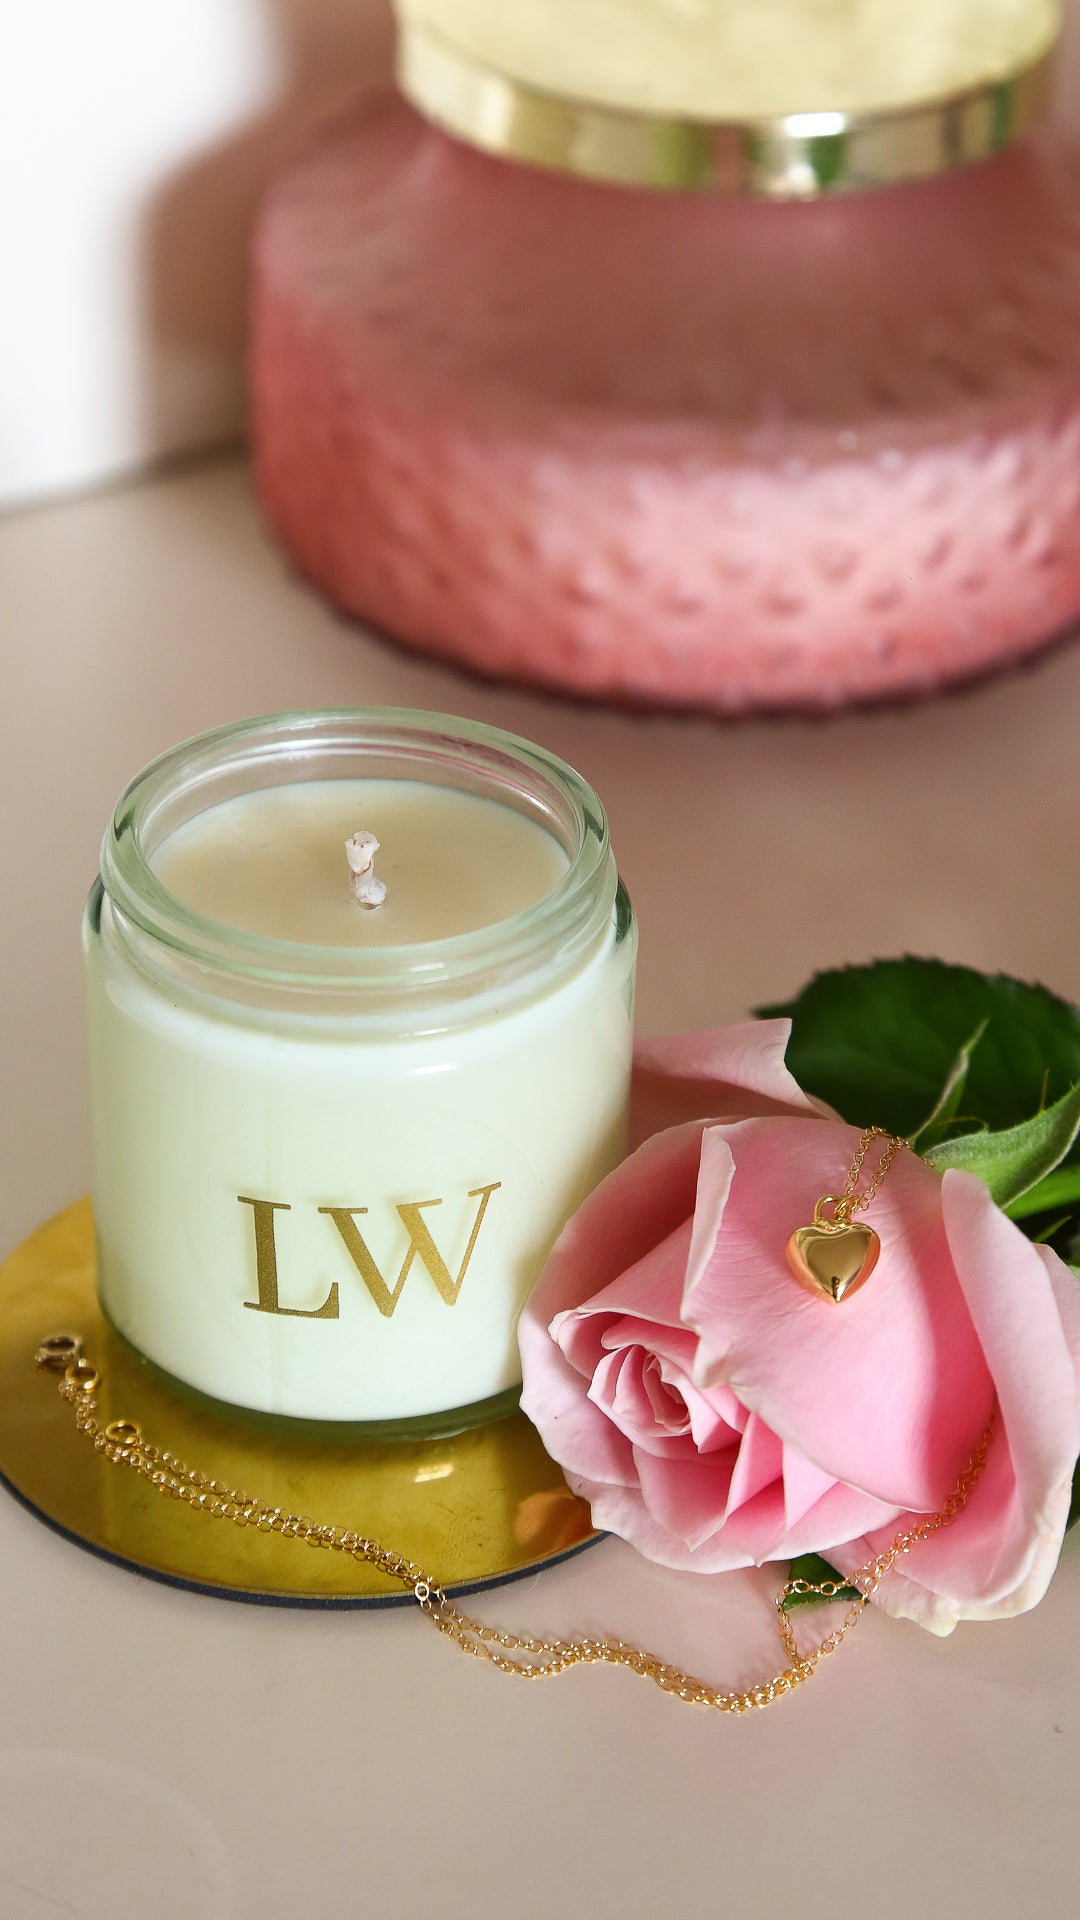 Lovewell Aromatherapy Votive Candle & Gold Heart Necklace